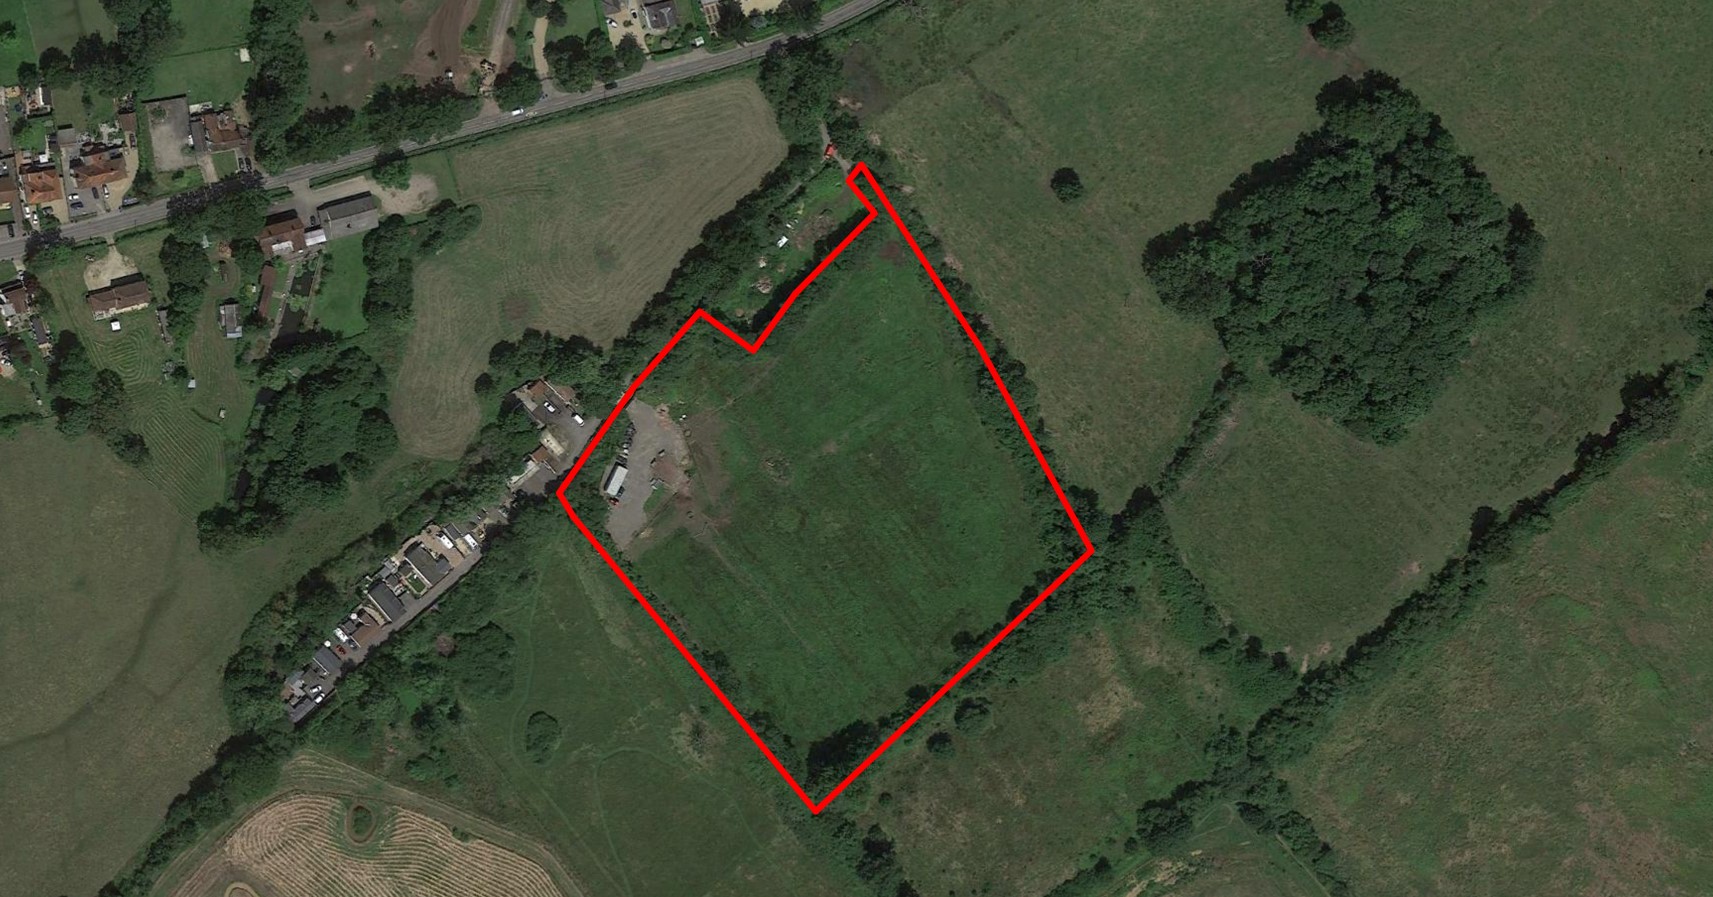 ABOUT 6 ACRES OF LAND WITH RECENT PLANNING PERMISSION IN WALTHAM ST LAWRENCE